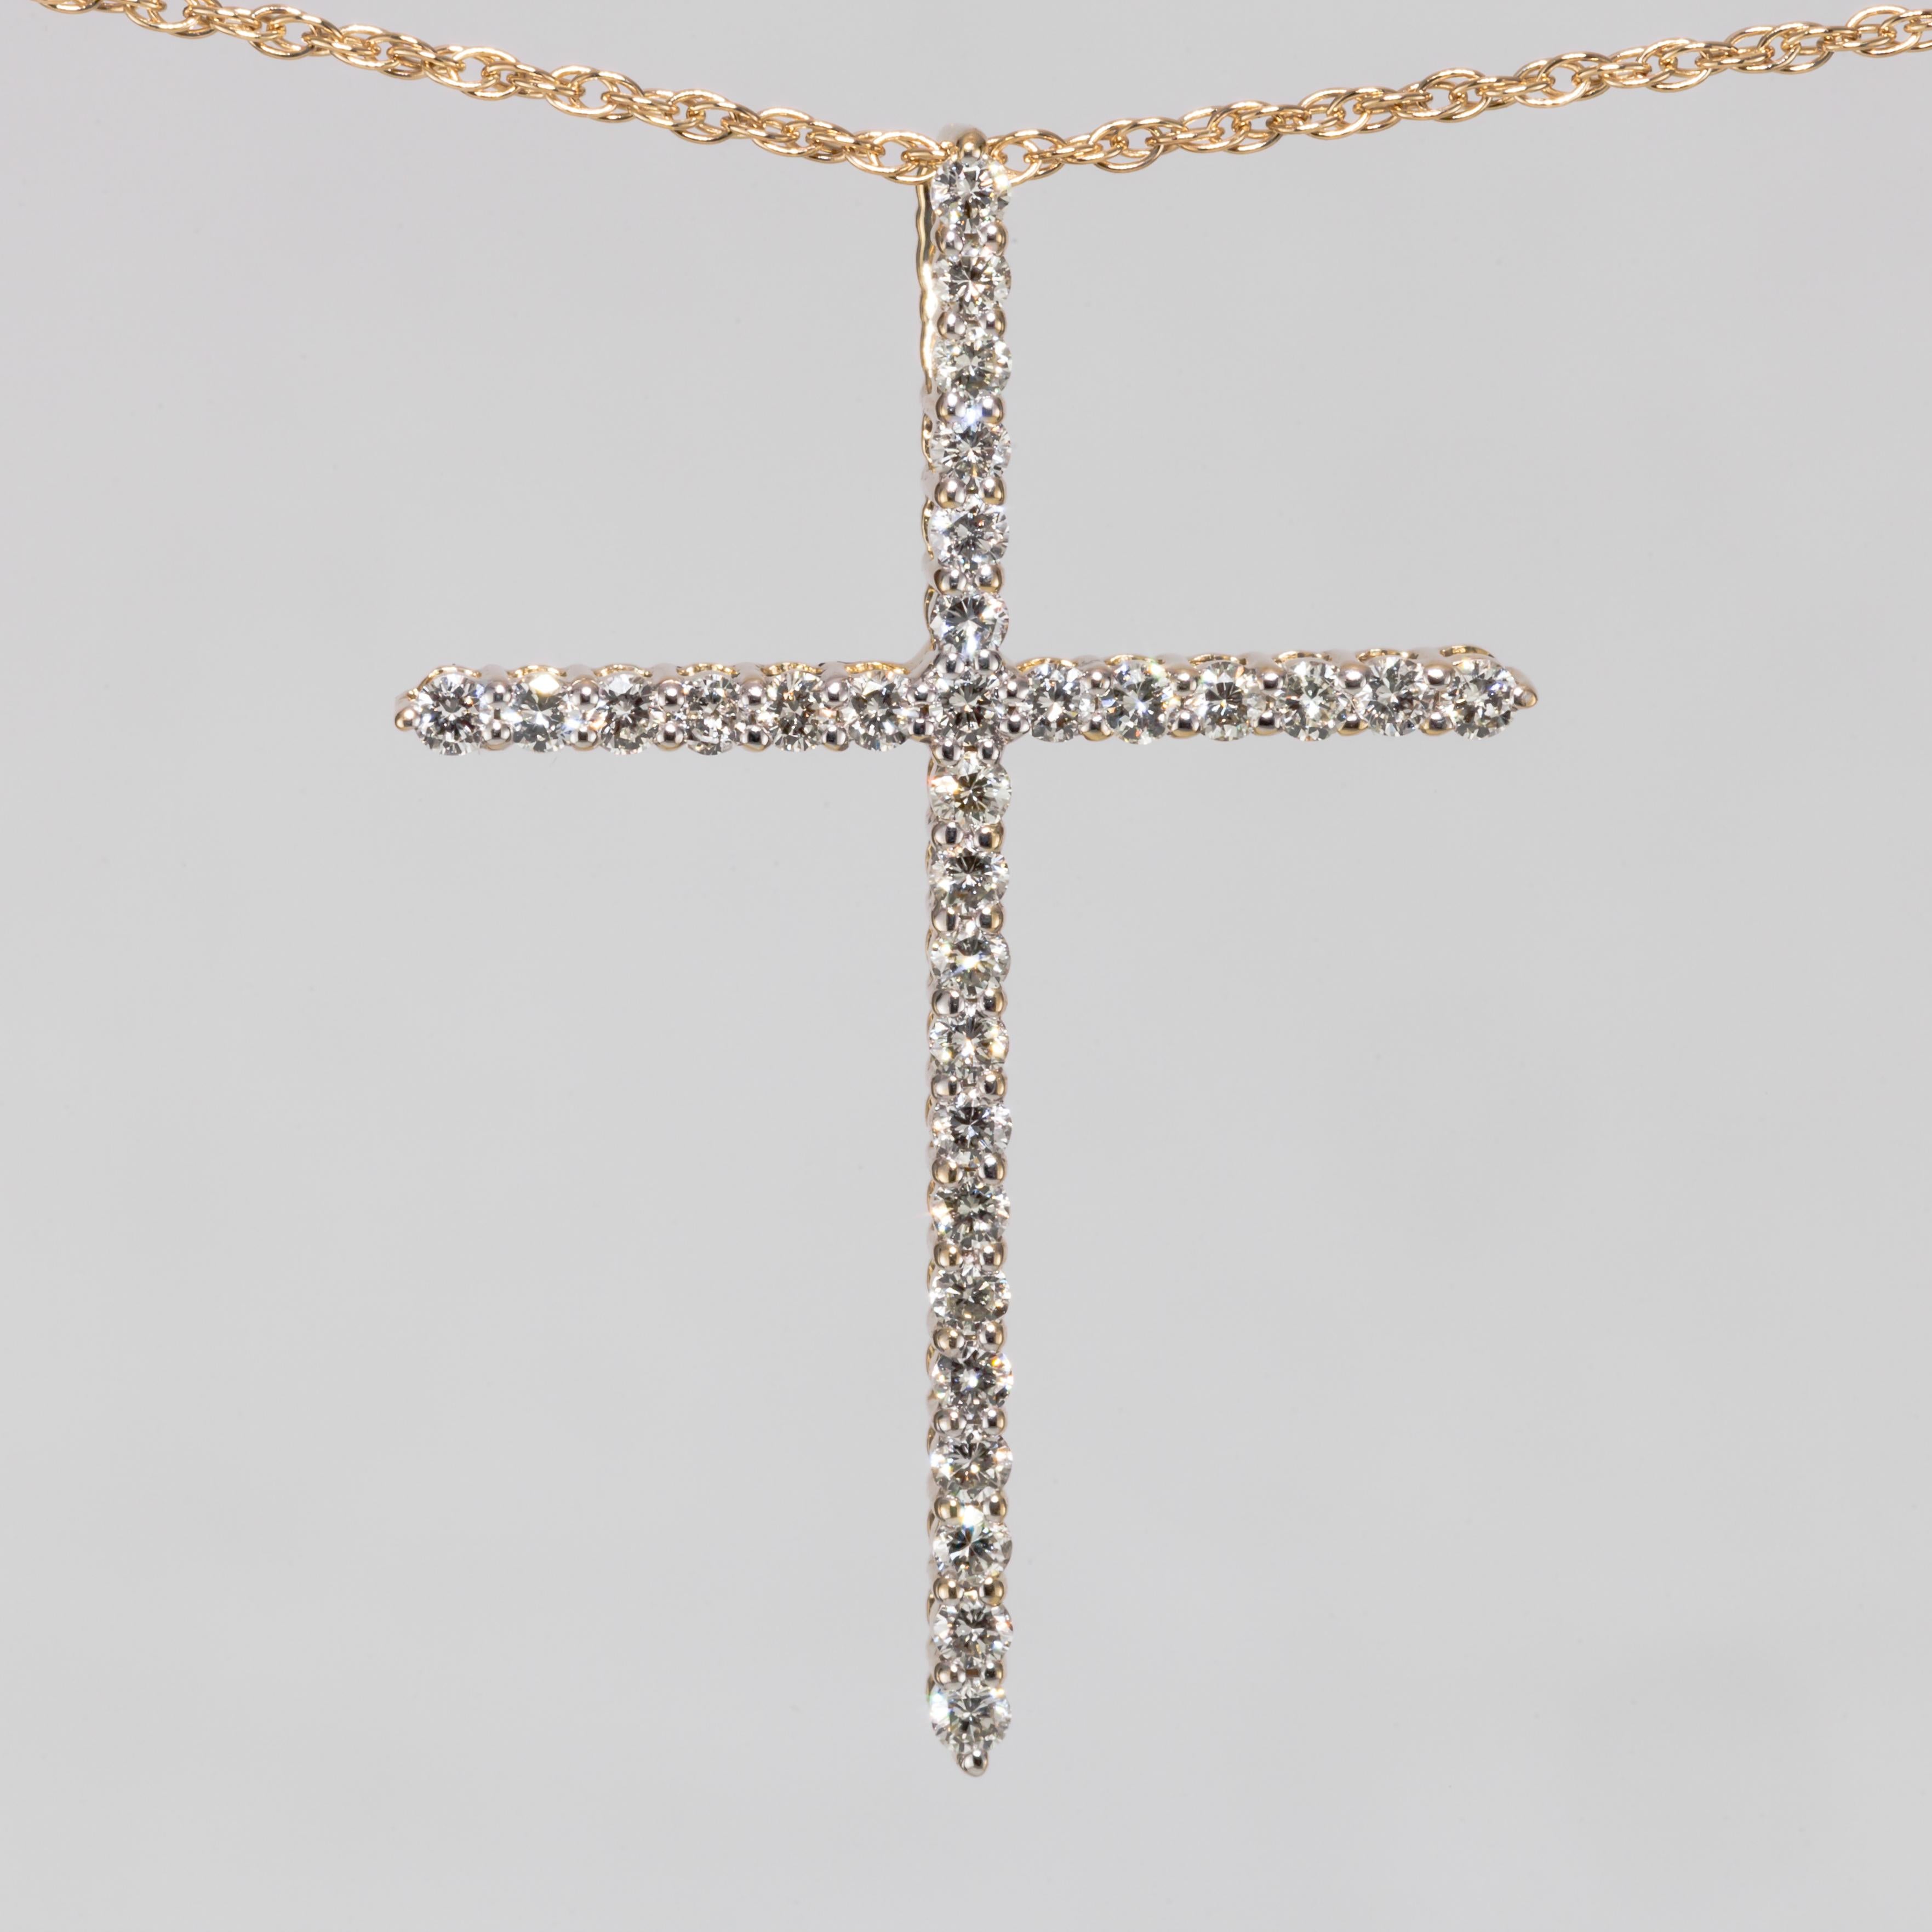 0.56 Carat Diamond Cross Pendant in Yellow Gold with Chain For Sale 3